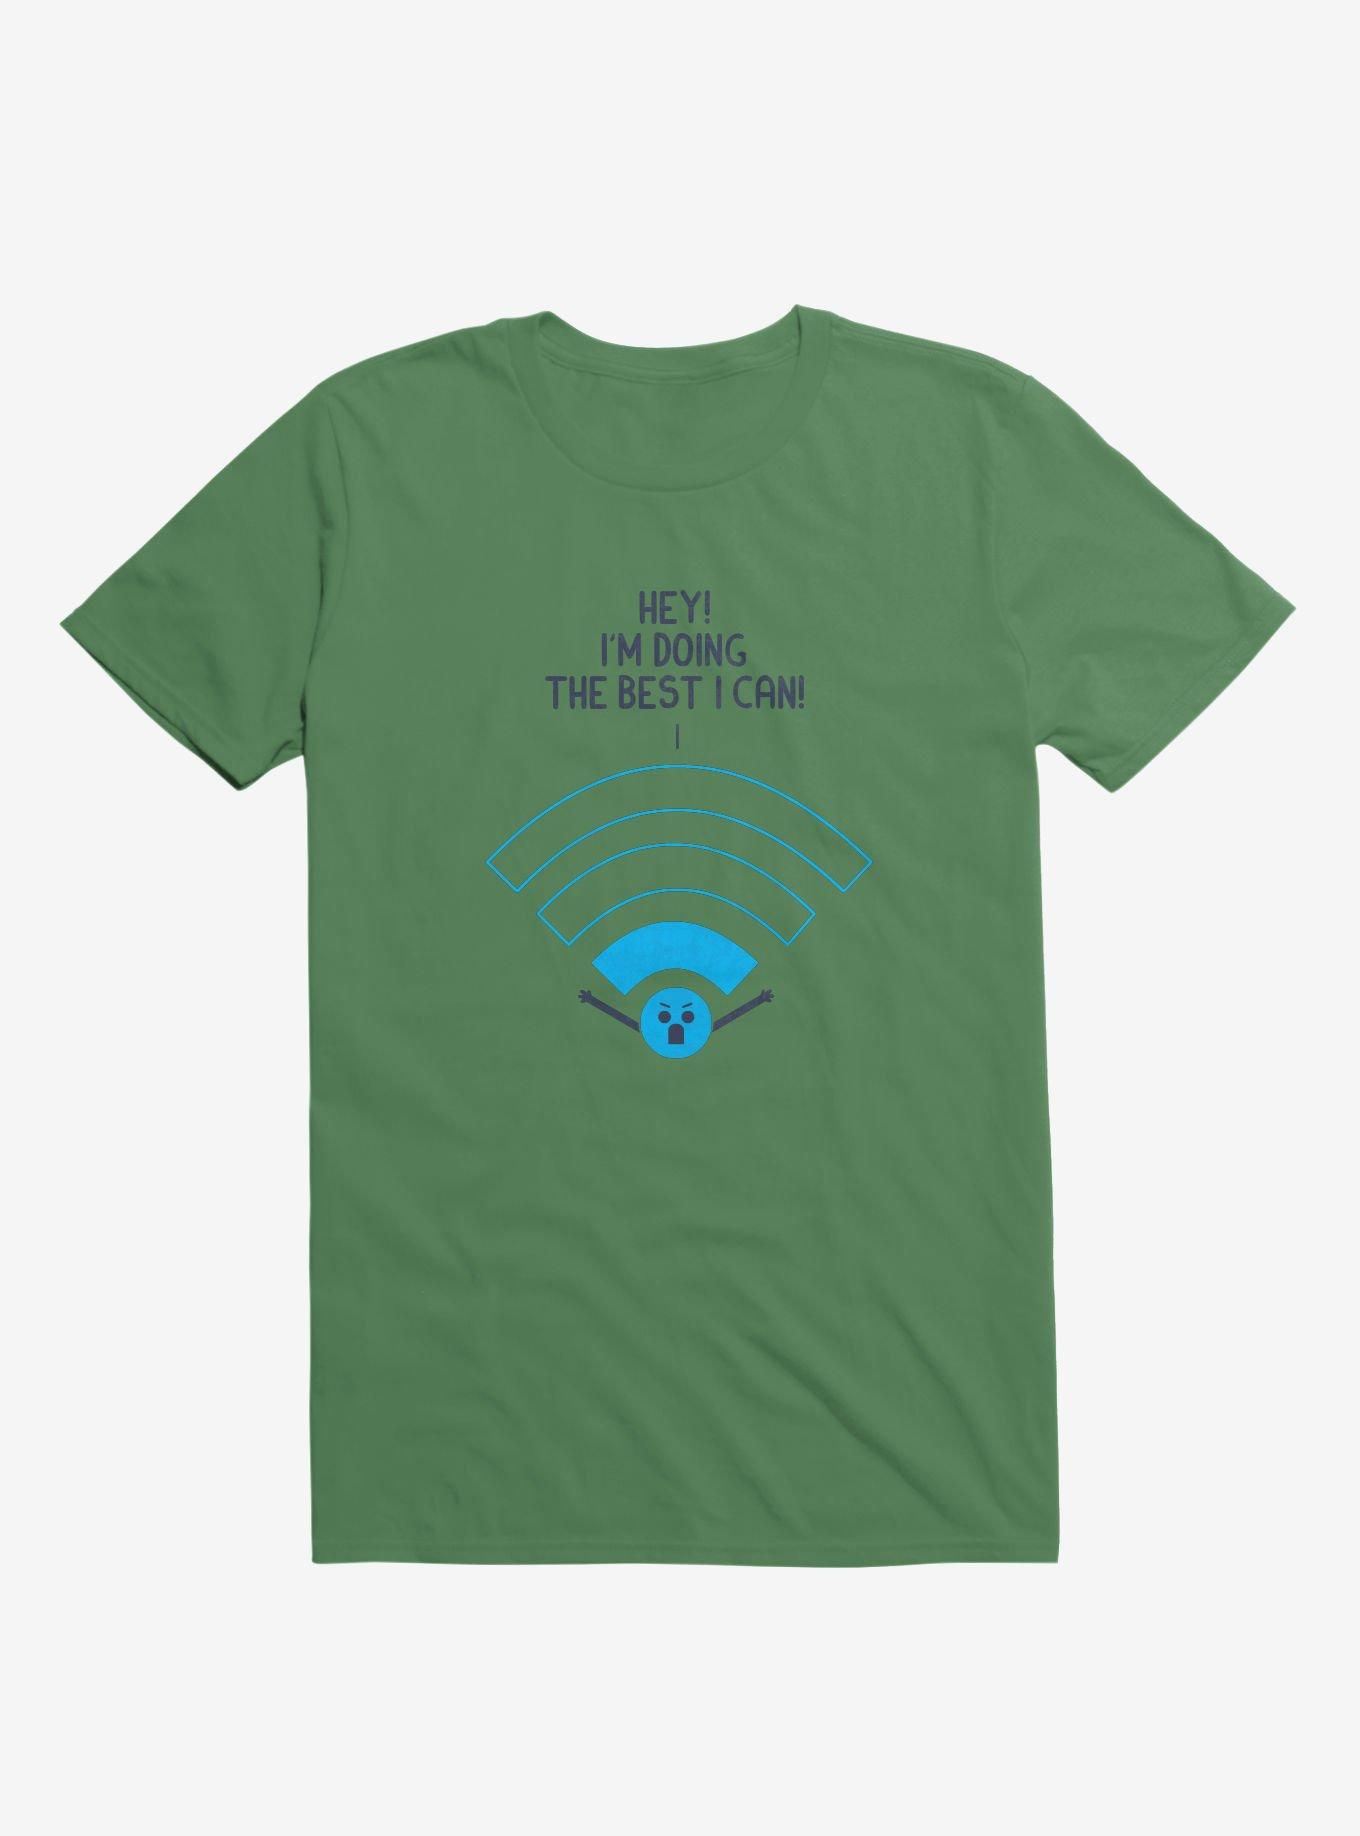 Angry Wi-Fi Hey! I'm Doing The Best I Can! Irish Green T-Shirt